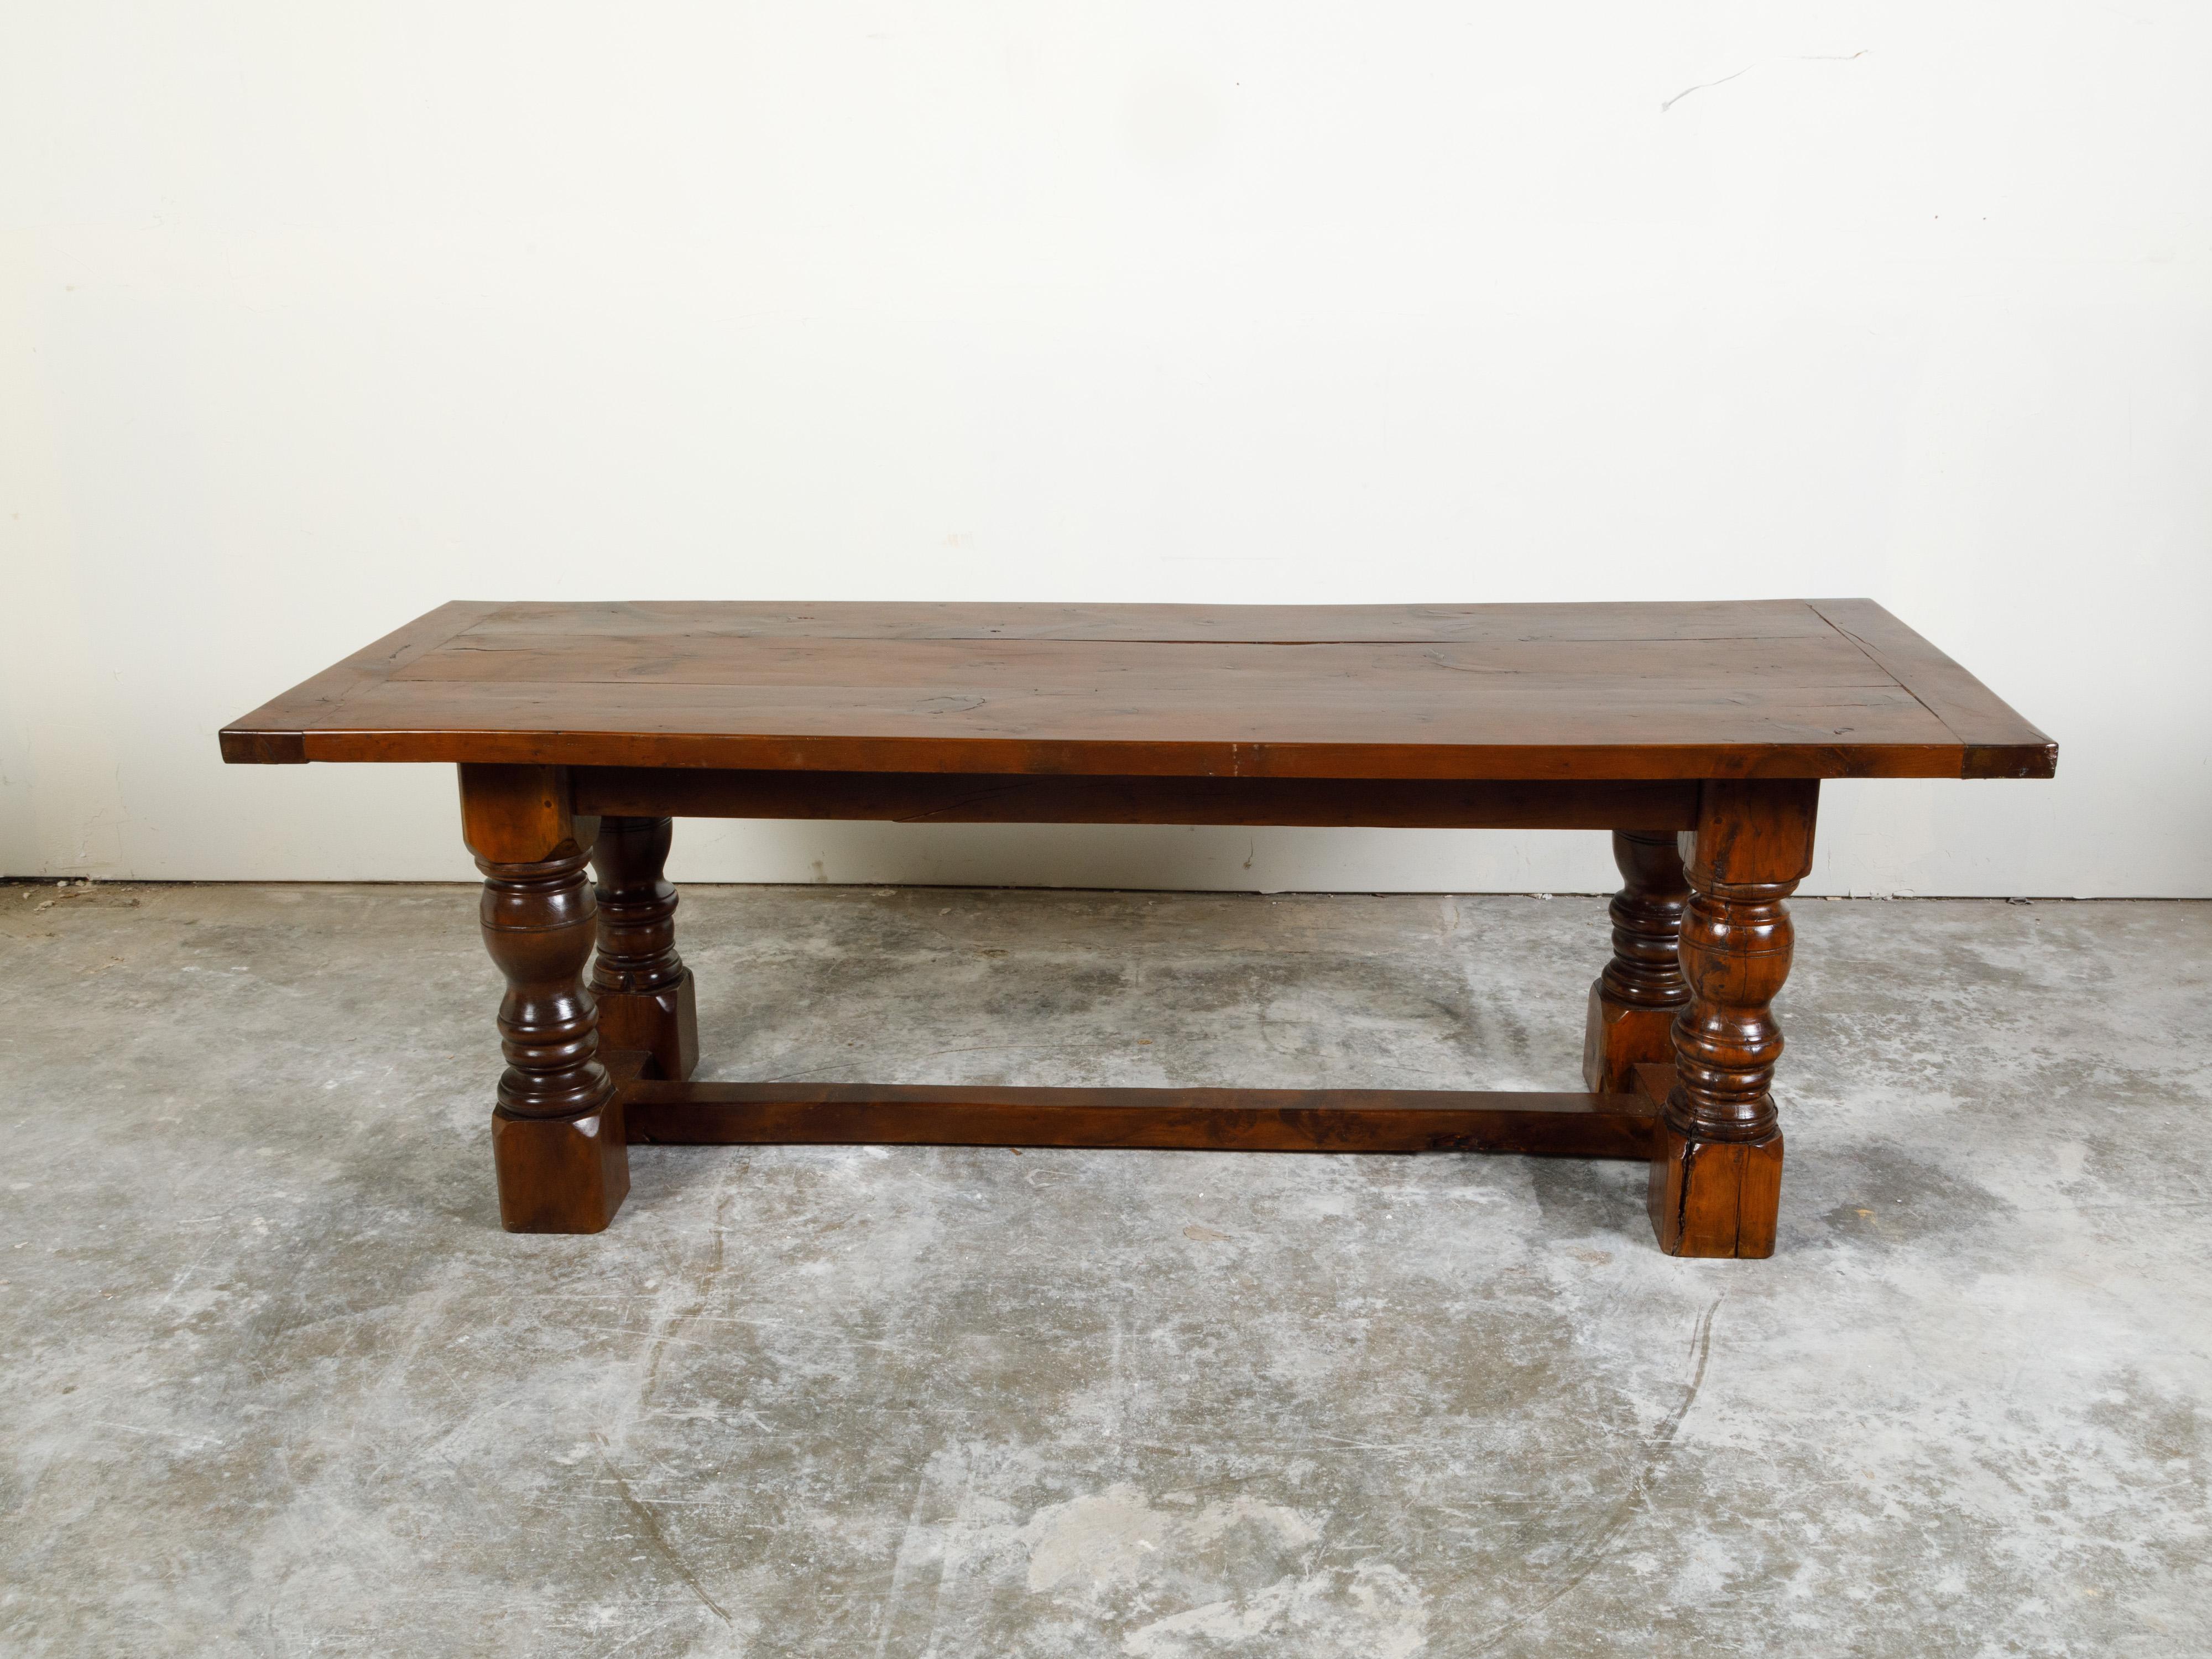 English 19th Century Walnut Dining Table with Turned Legs and H-Form Stretcher For Sale 3